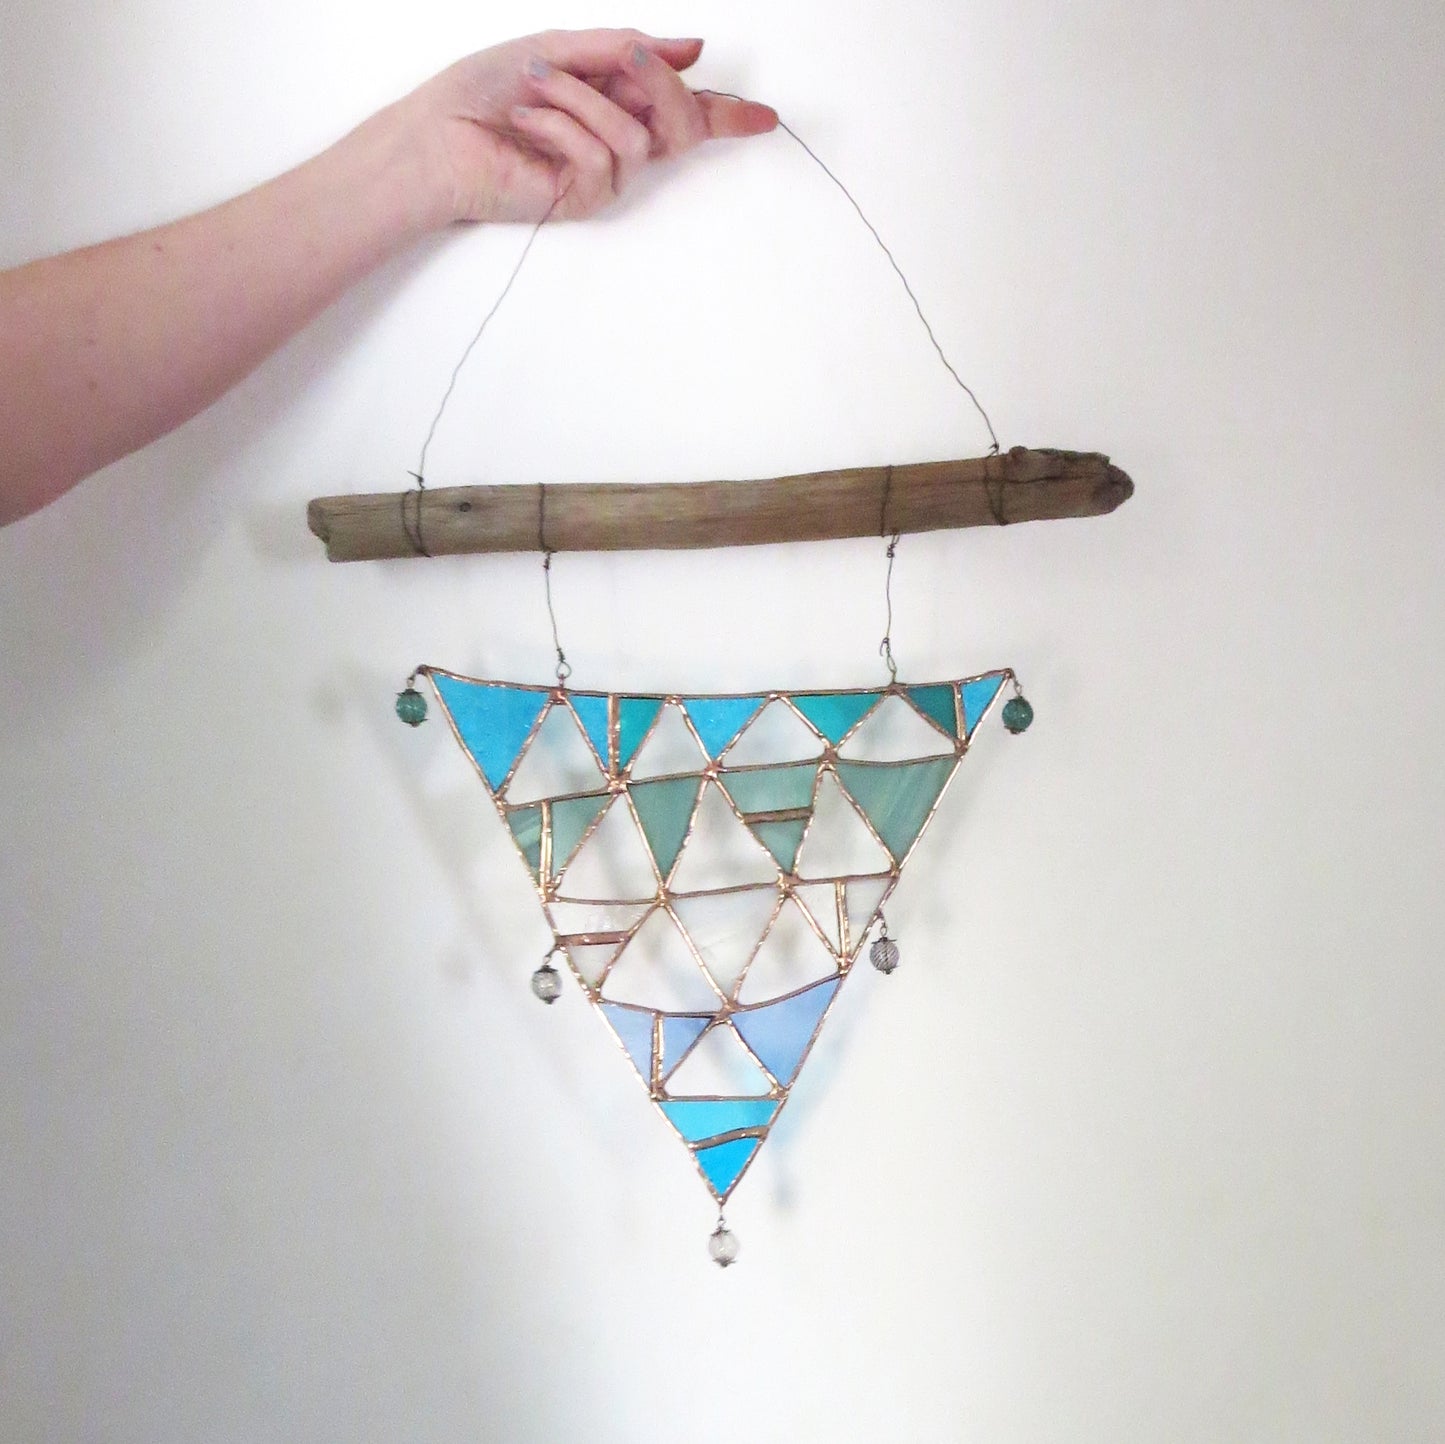 Handmade stained glass hanging art piece